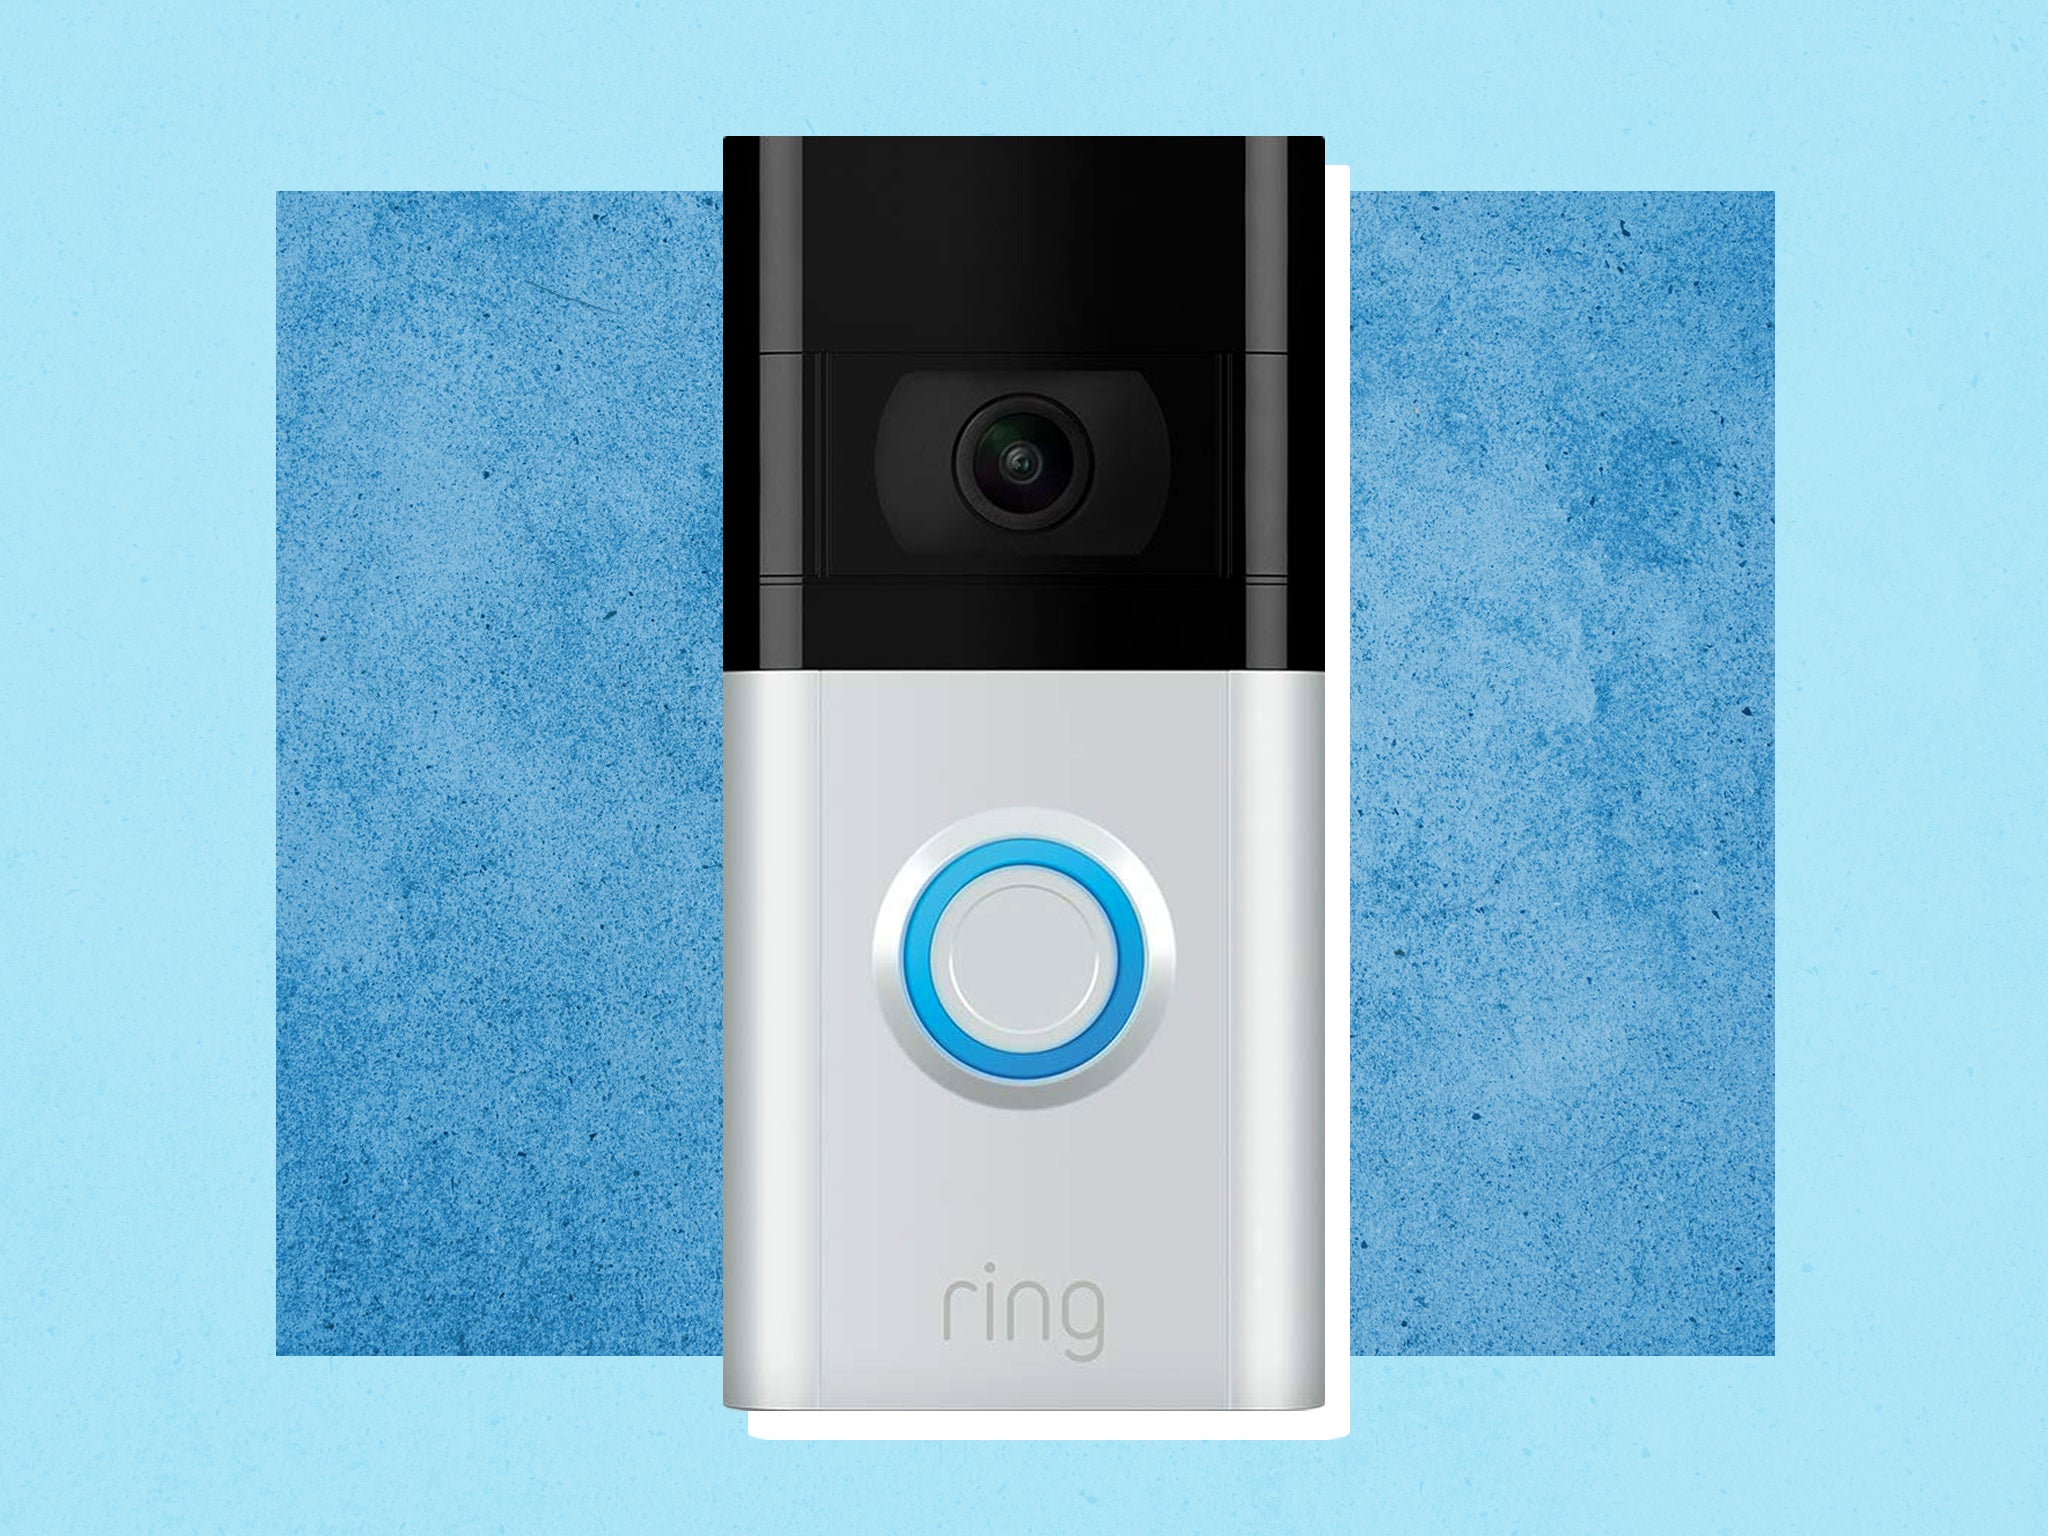 Save on home security with this Ring deal you definitely don’t want to miss